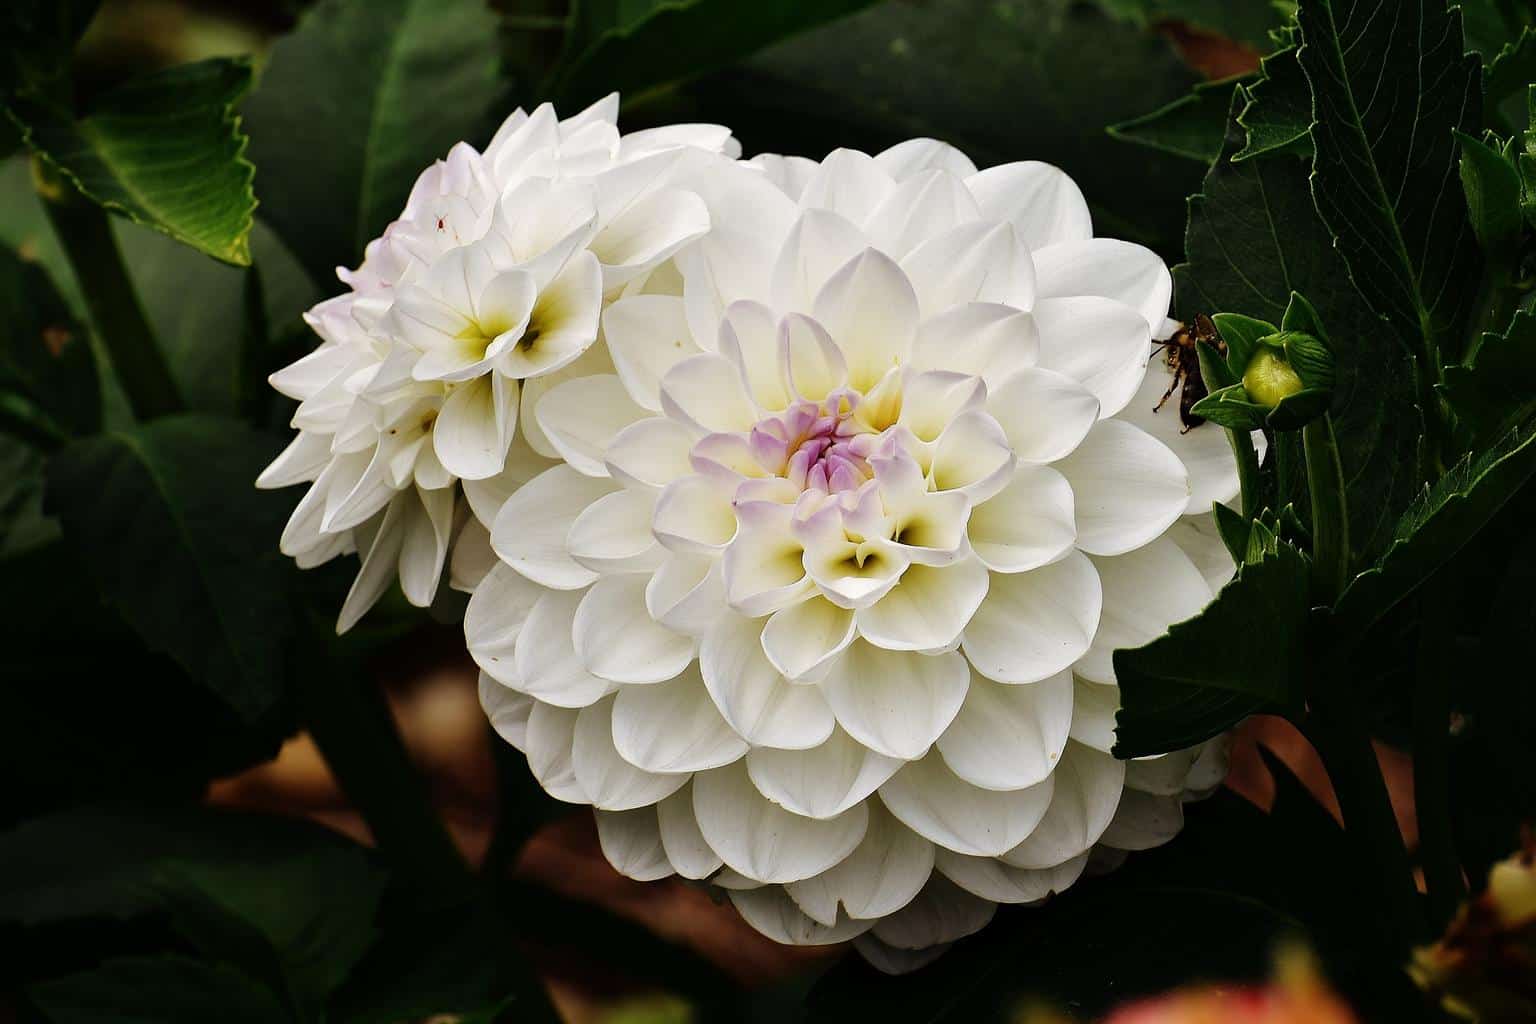 Dahlia meaning and symbolism